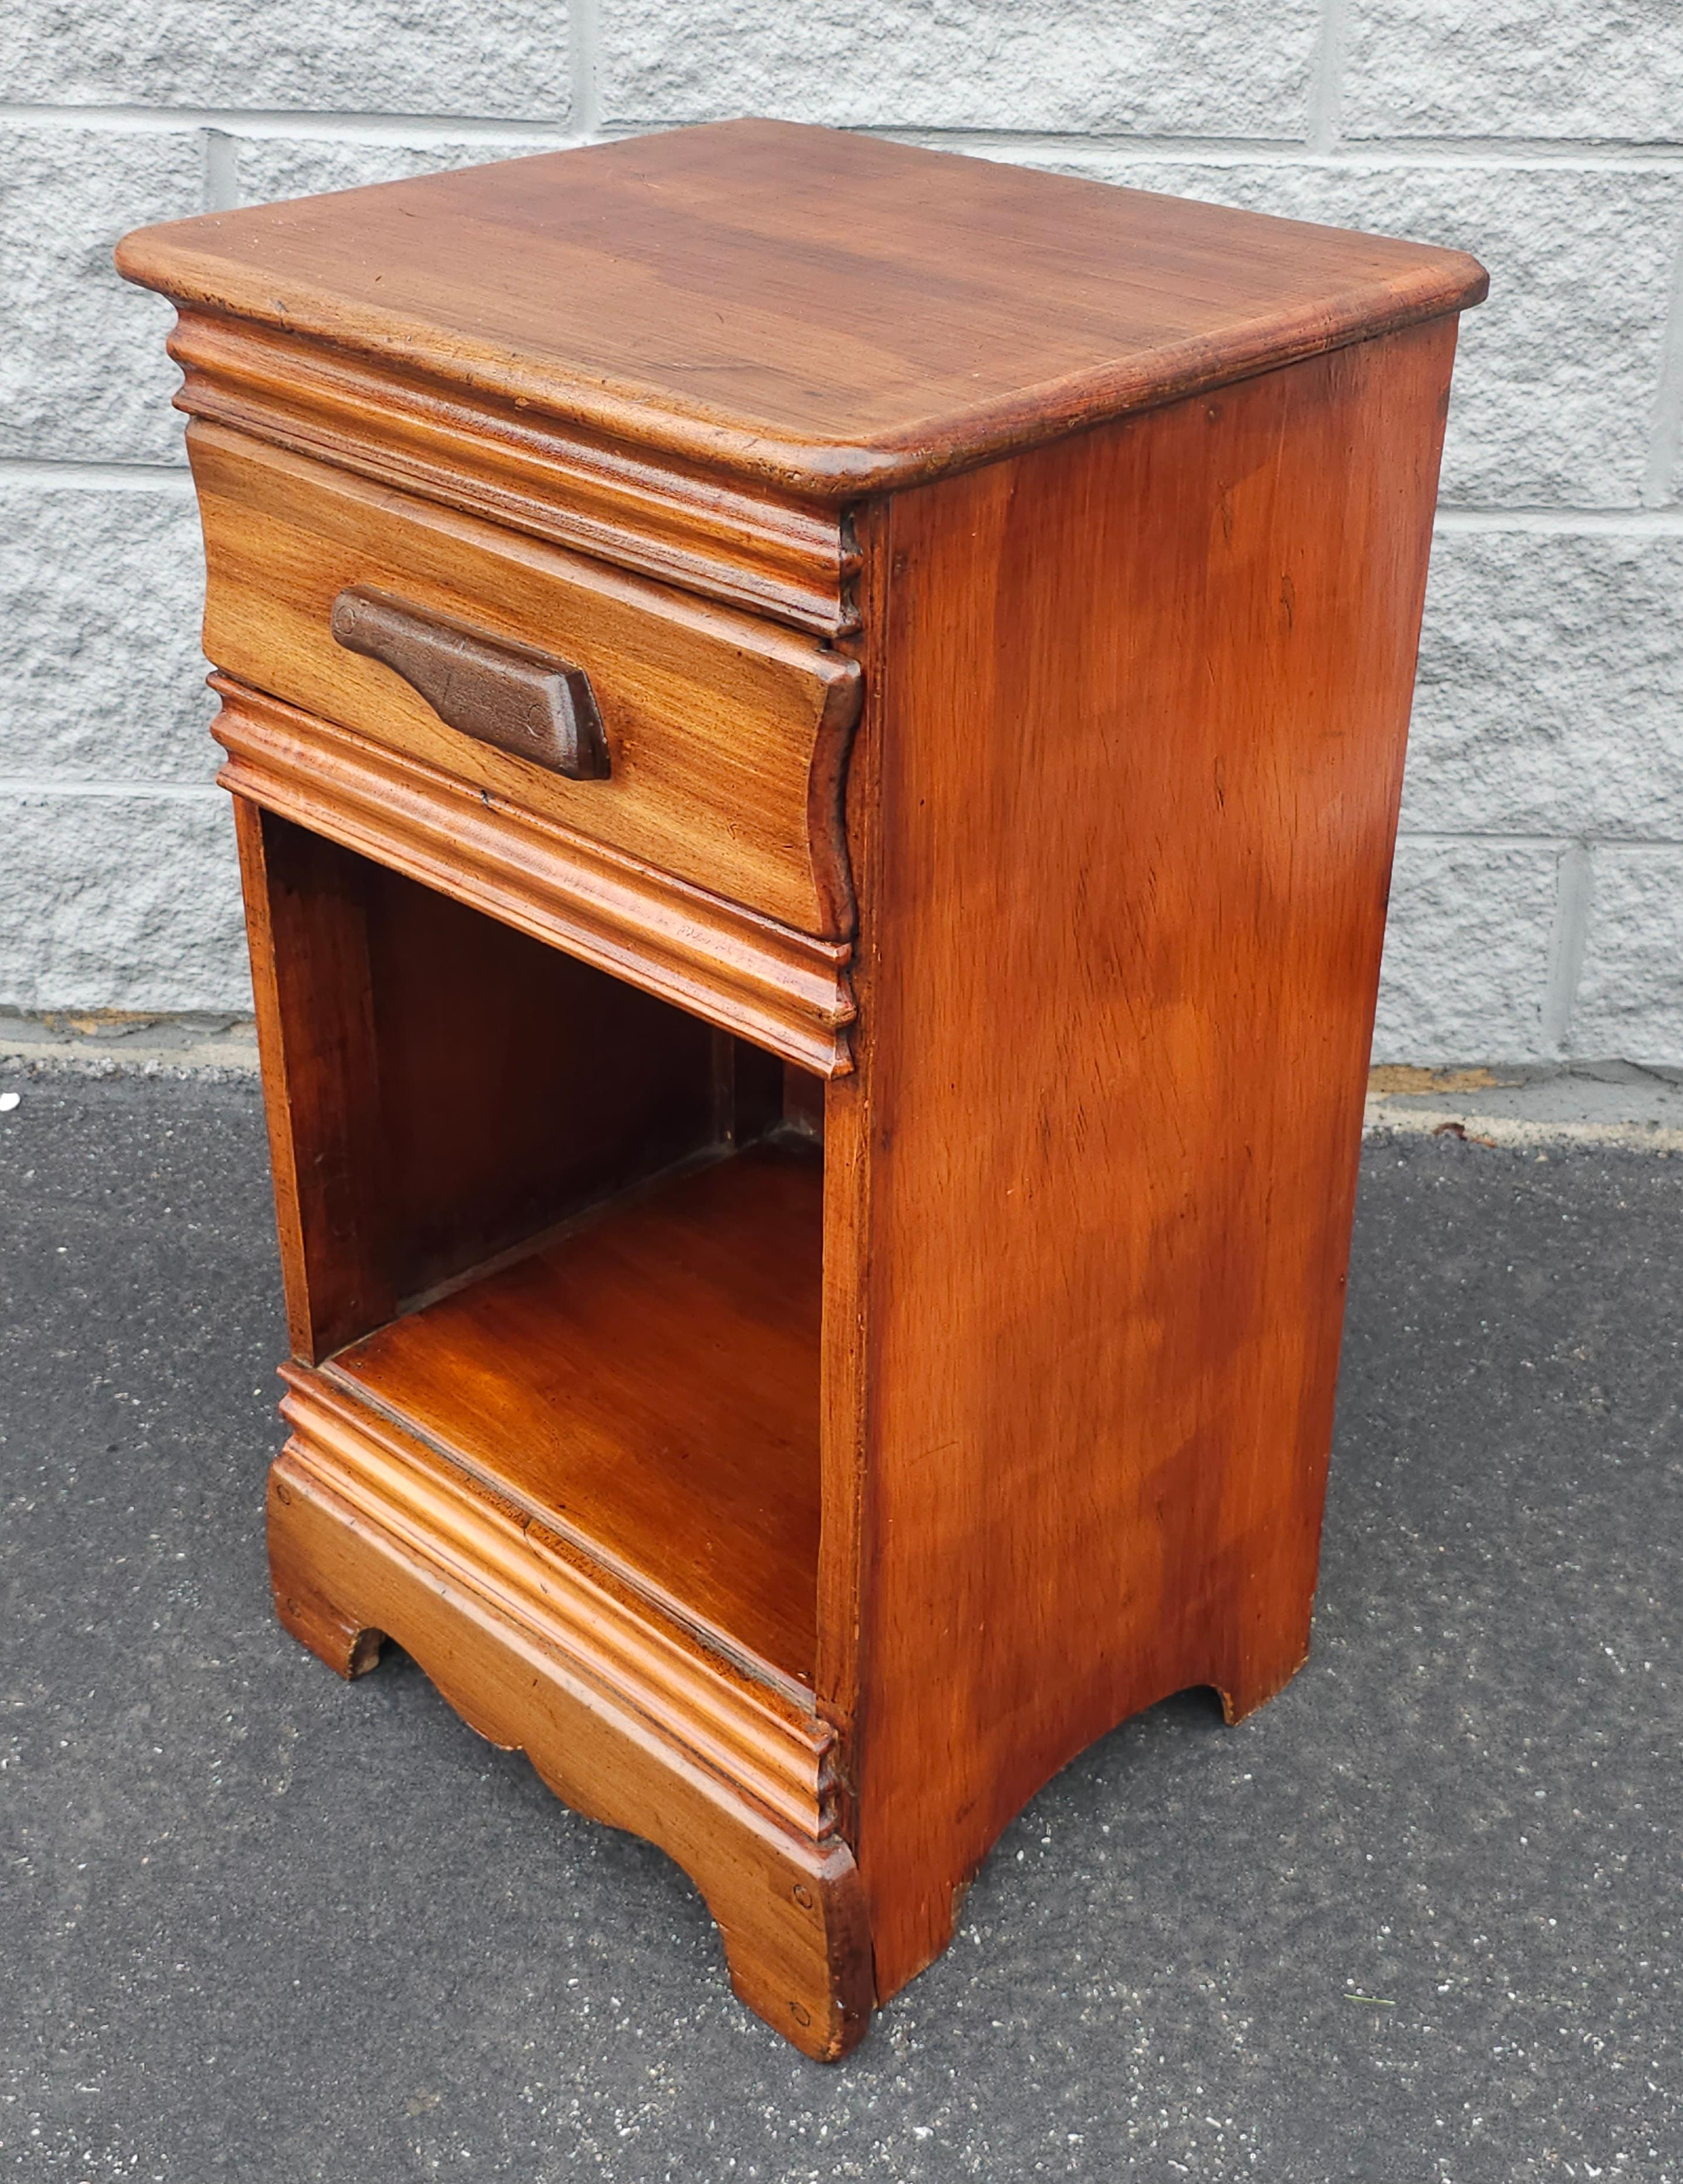 Wood Early 20th Century Victorian Single Drawer Mahogany BedSide Table For Sale